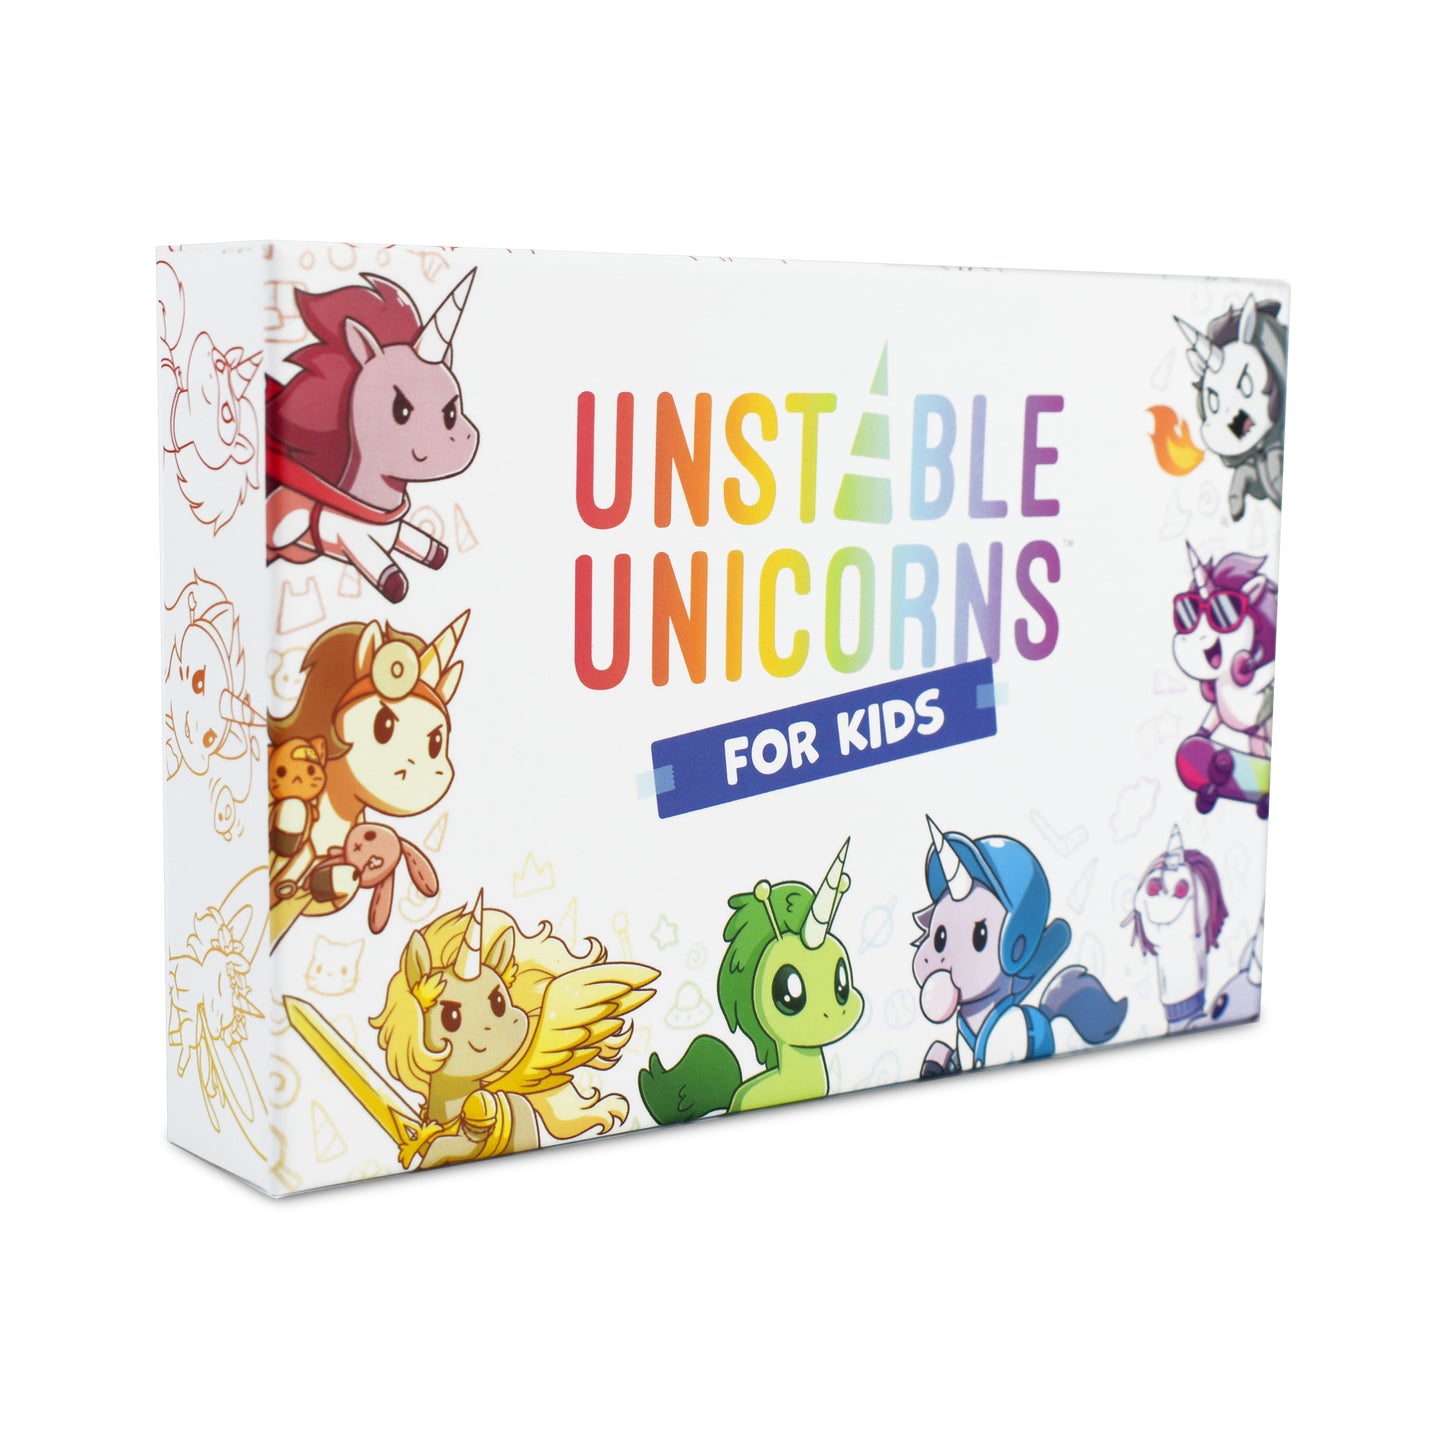 A board game box labeled "Unstable Unicorns for Kids: Base Game" by Unstable Games, featuring colorful cartoon unicorns with various playful designs and expressions, is one of the most engaging unicorn card games available.